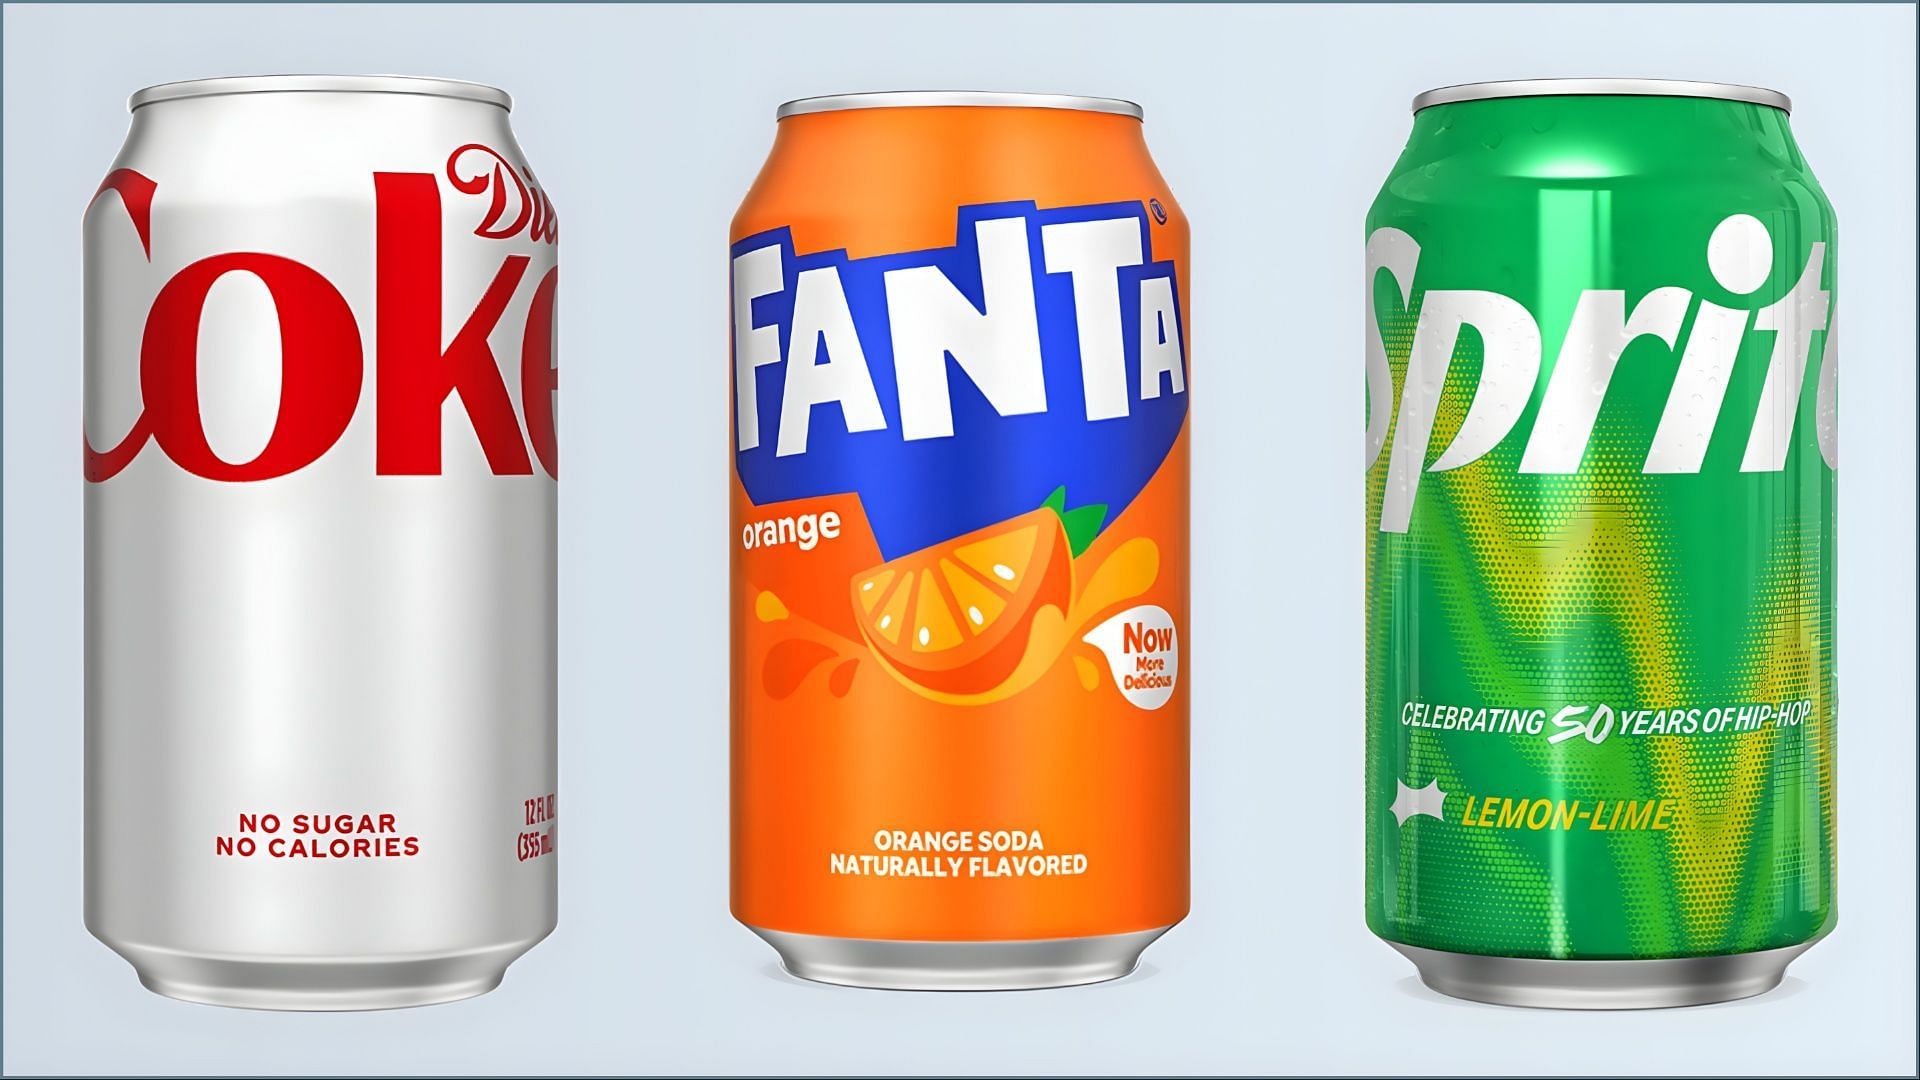 The recalled Diet Coke, Sprite, and Fanta Orange cans were sold in Alabama, Florida, and Mississippi (Image via Coca-Cola)